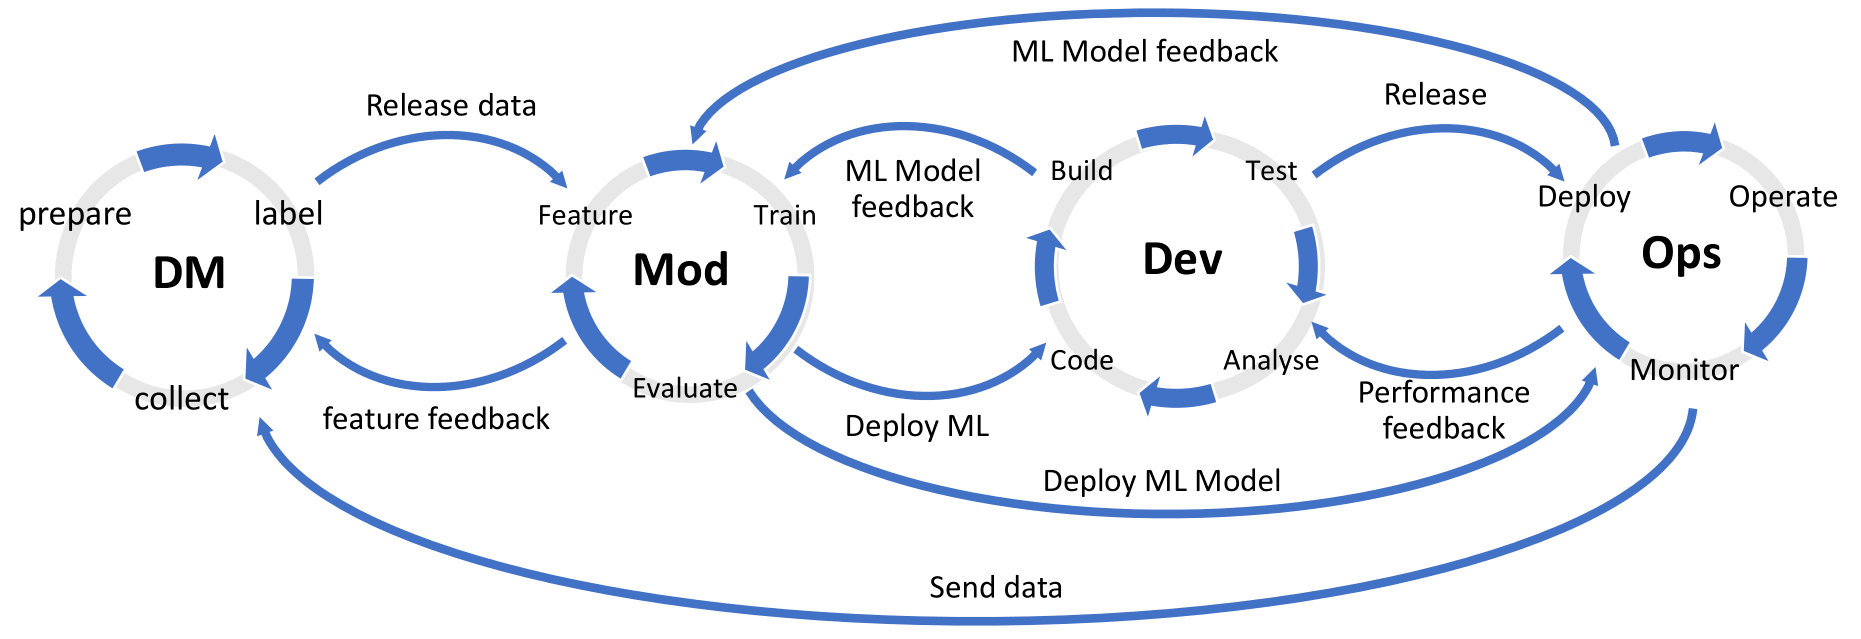 A Framework to Model ML Engineering Processes